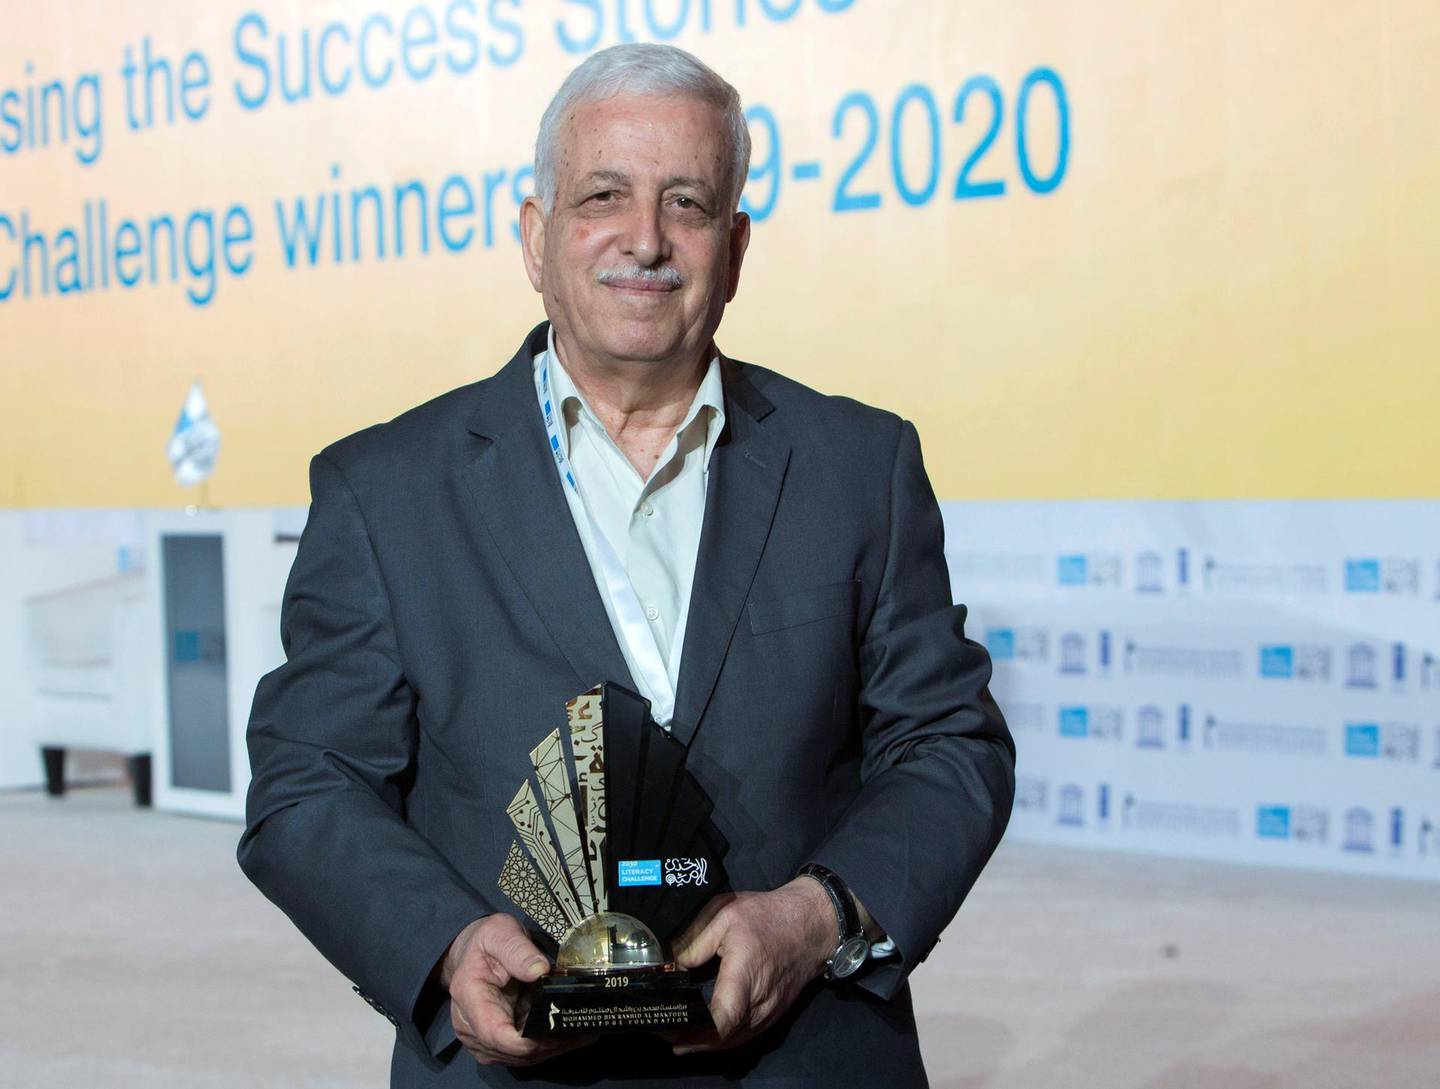 Dubai, United Arab Emirates - Mahmoud Abbas at the announcing of the winners of the Arabic literacy challenge announcing a declaration to eradicate illiteracy.  Ruel Pableo for The National Anna Zacharias story